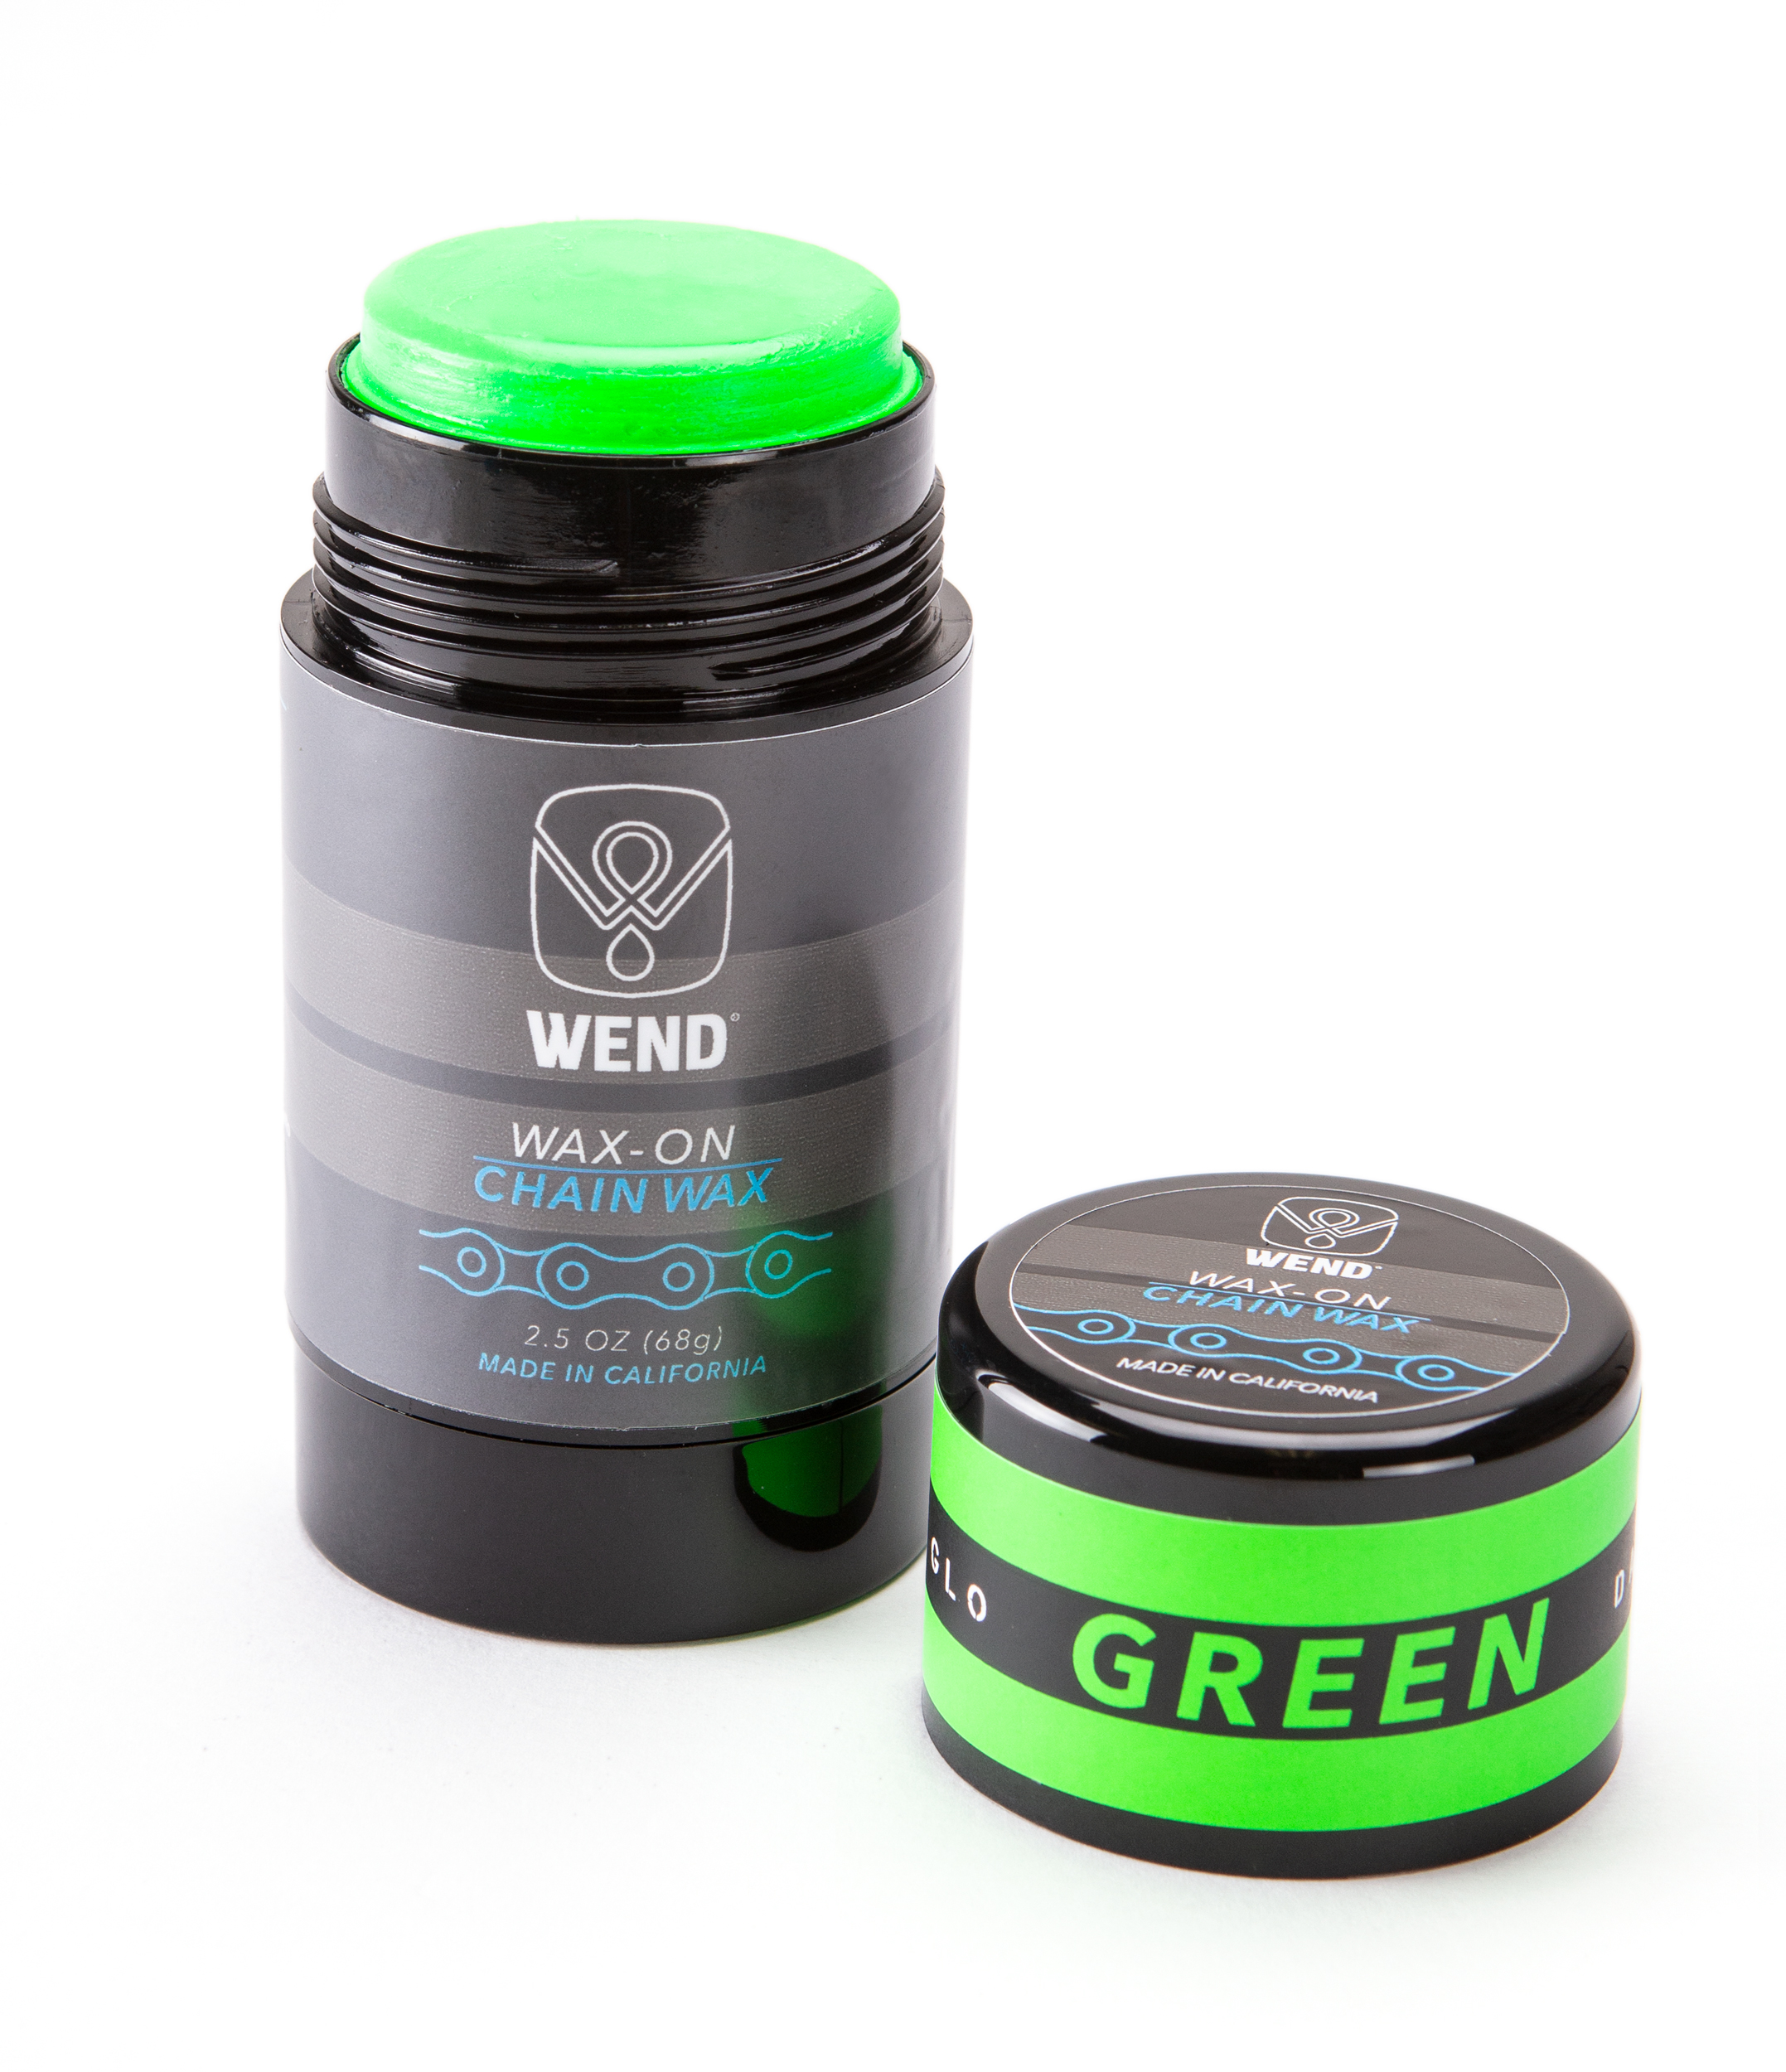 WEND BIKE WEND WAX-ON 5oZ PACK 6 COLORS WWOCWPPC Accessories Lubricants Wax 